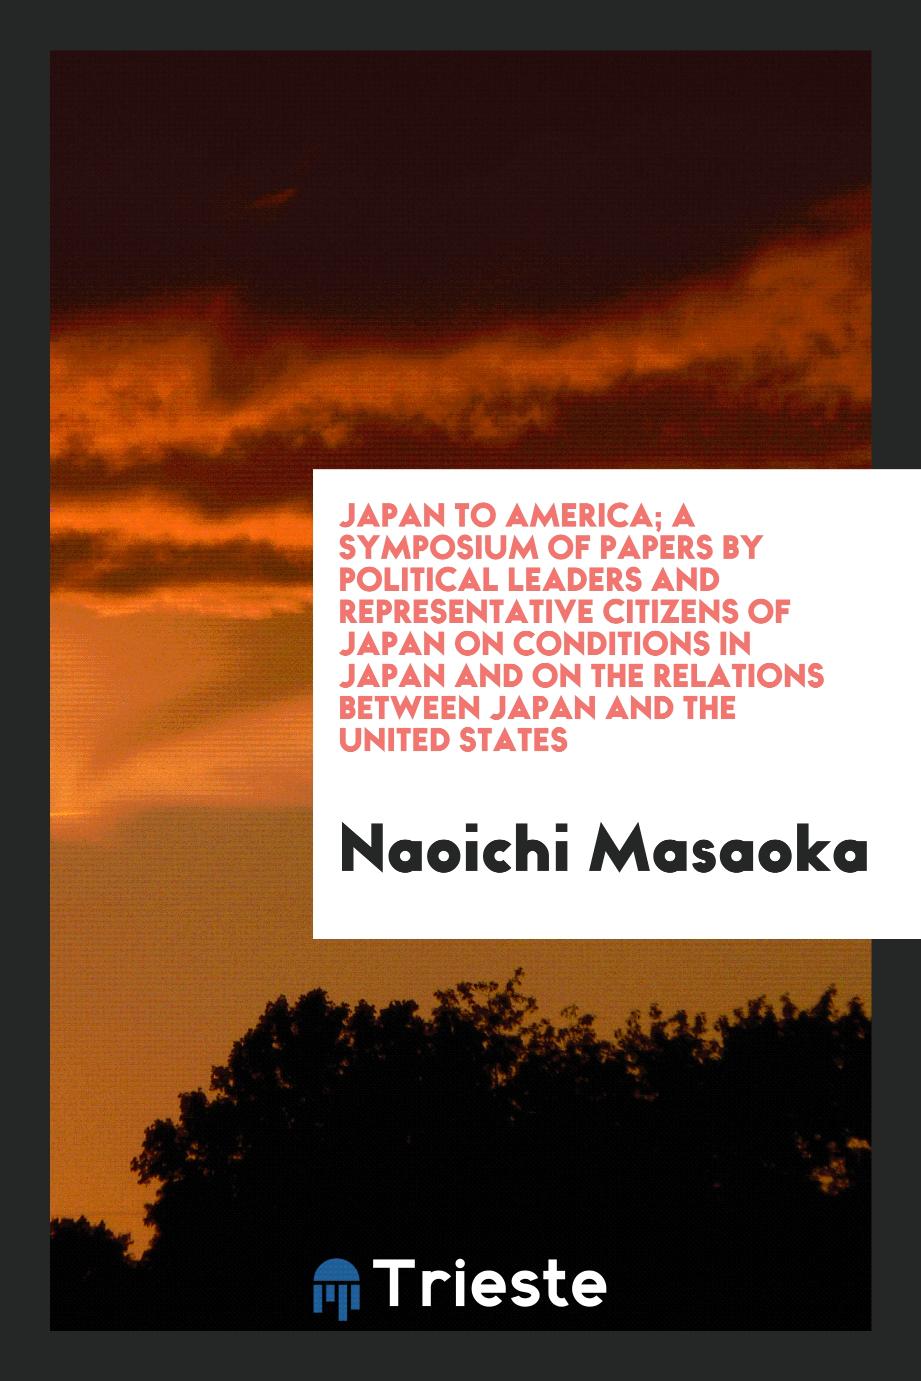 Japan to America; a symposium of papers by political leaders and representative citizens of Japan on conditions in Japan and on the relations between Japan and the United States